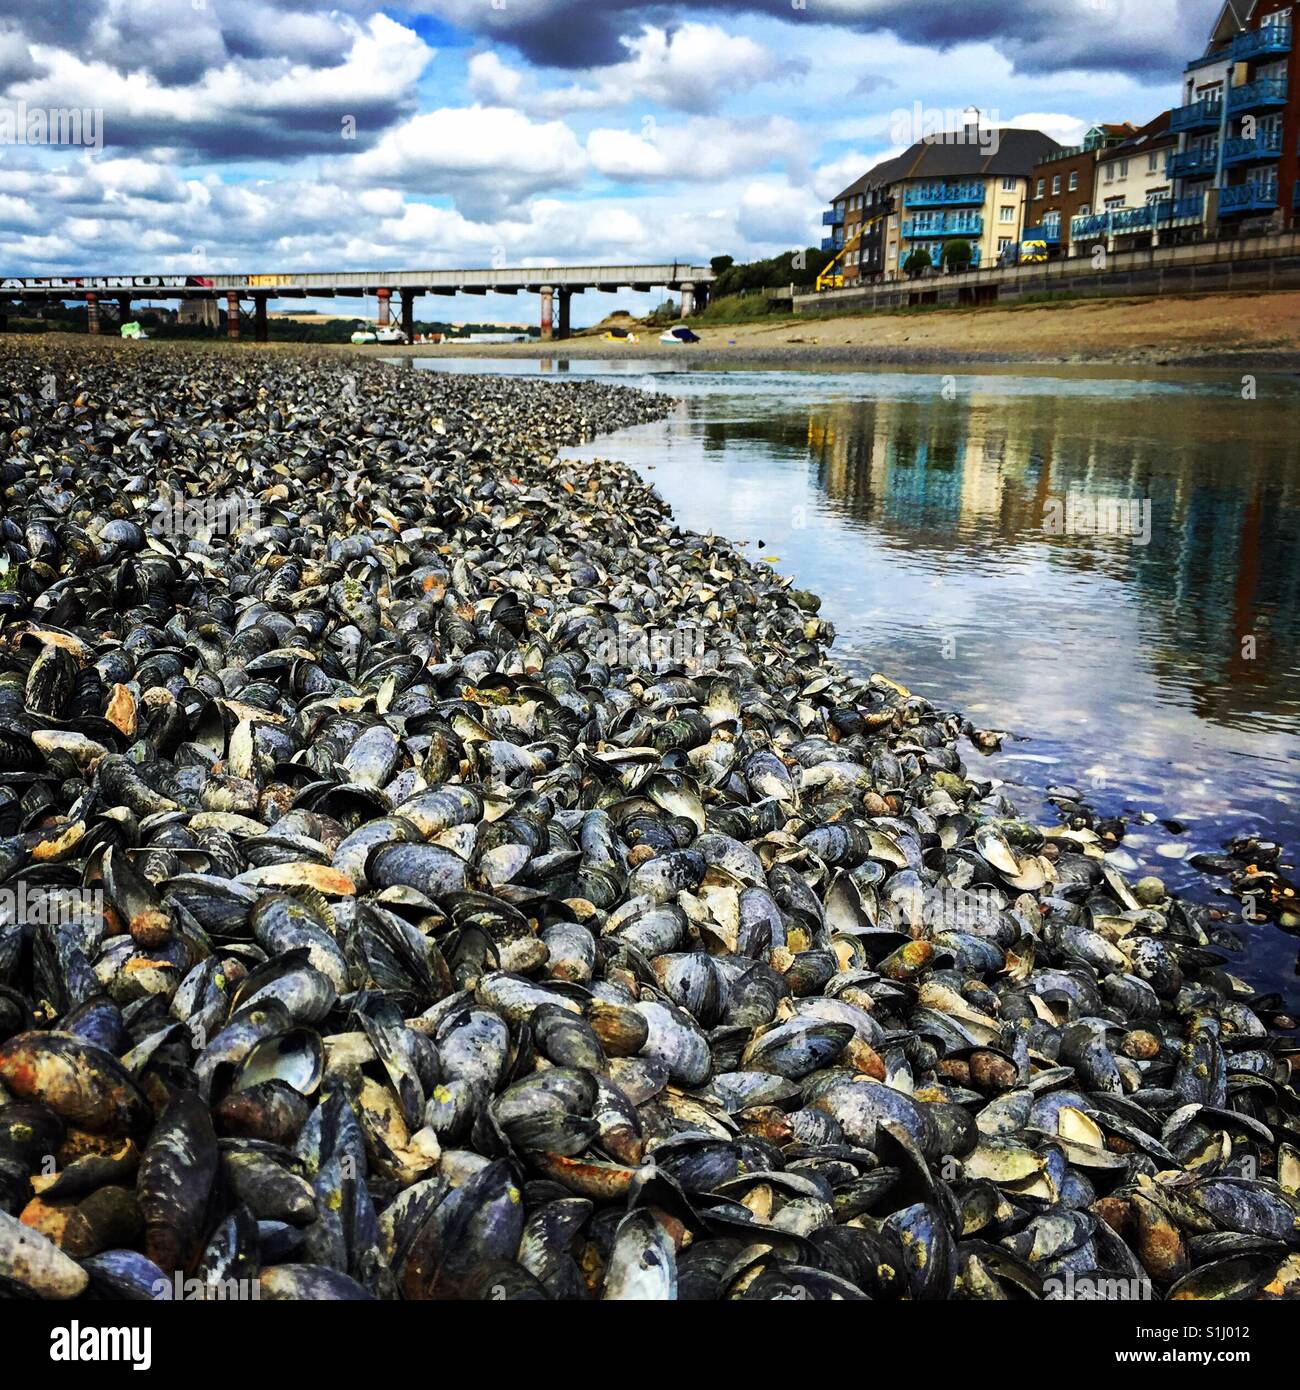 Mussels galore. Stock Photo